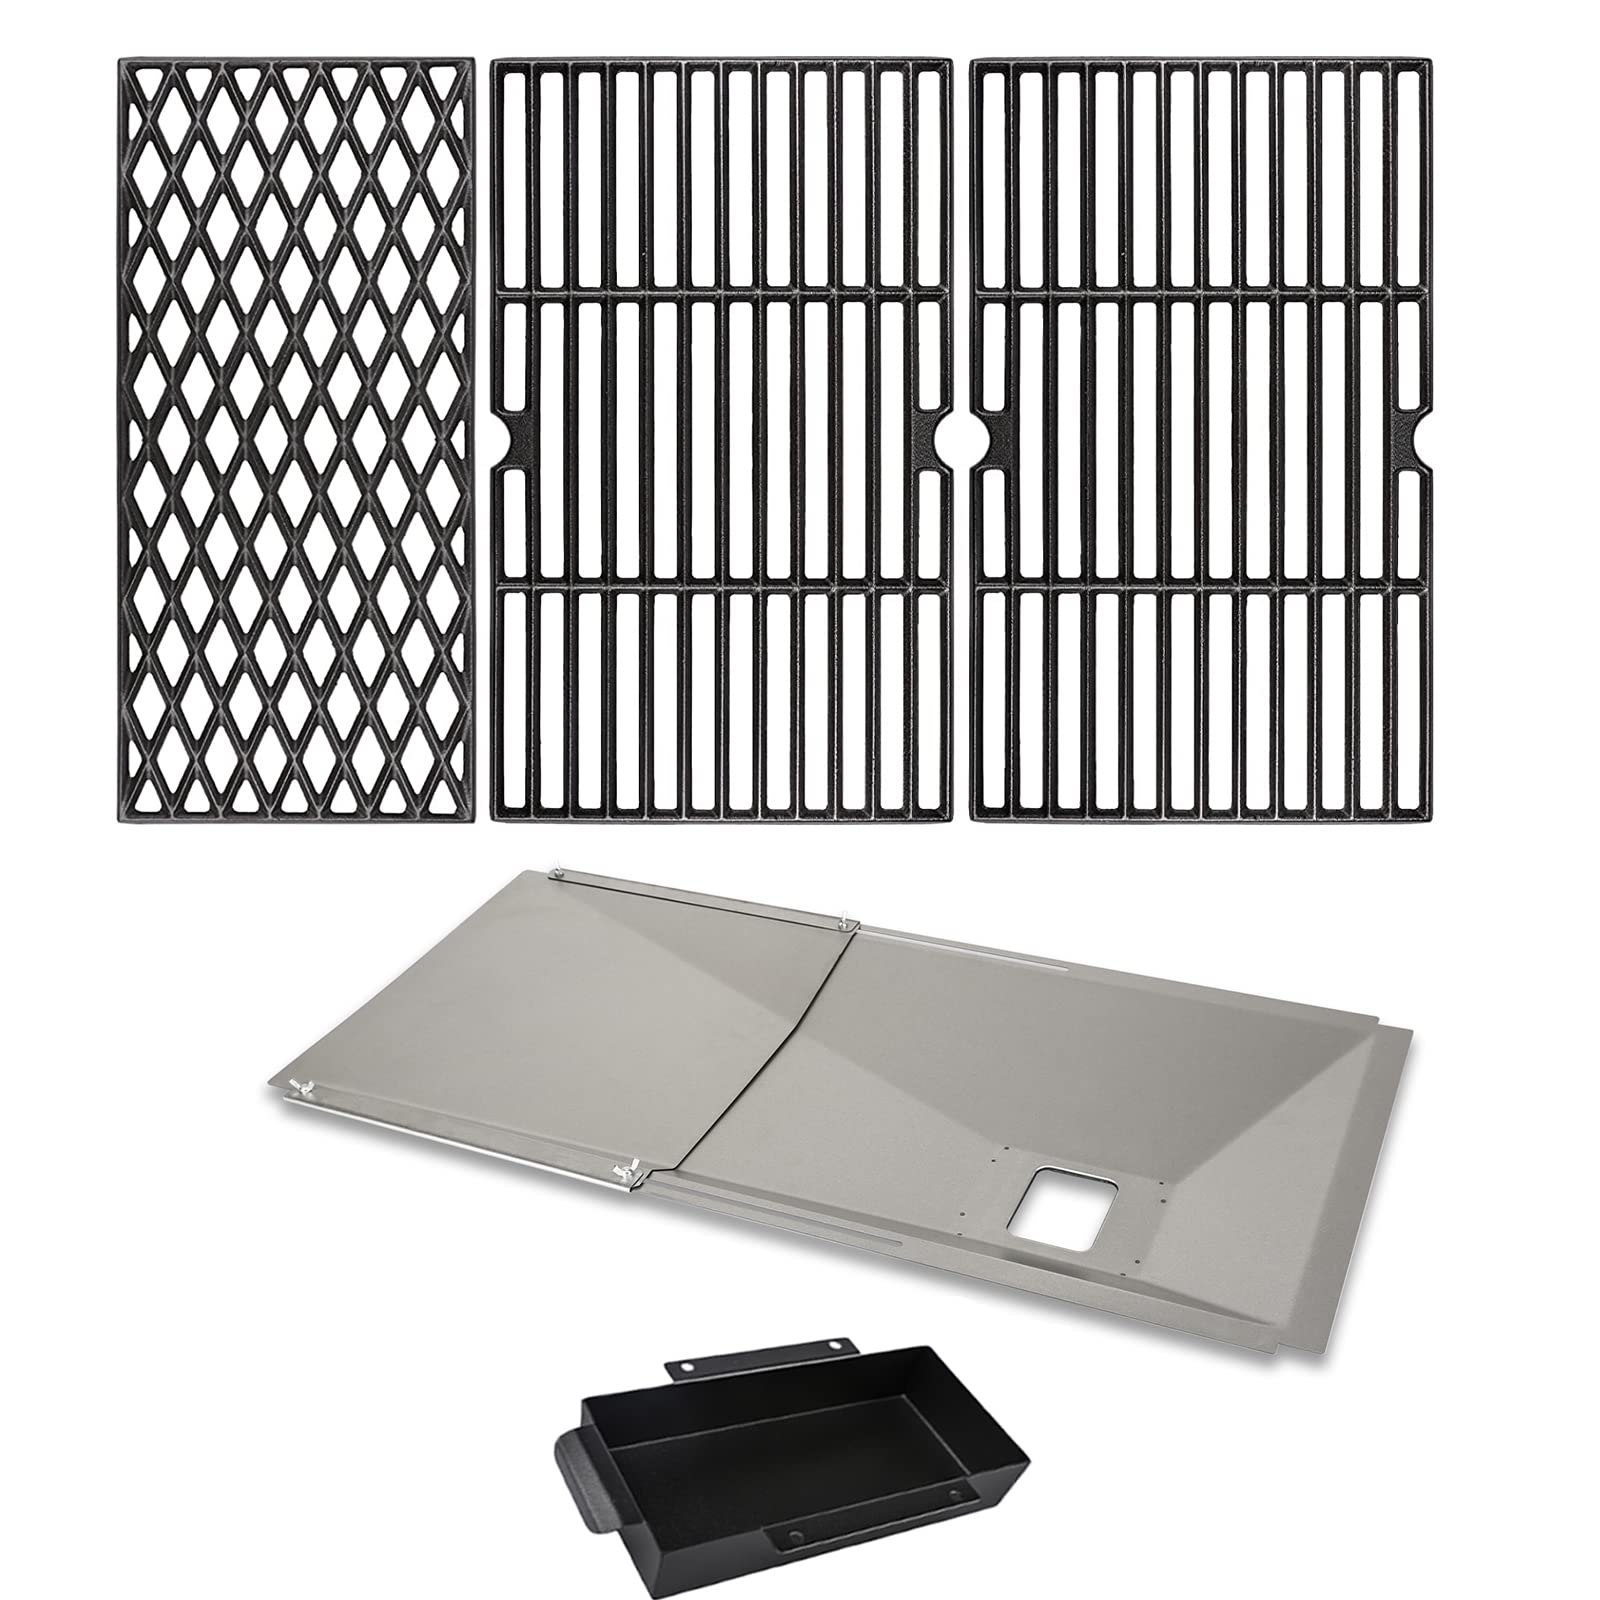 Uniflasy Cast Iron Cooking Grates and Grease Tray with Catch Pan for Dyna glo DGH450CRP DGH450CRP-D 4 Burner, DGH485CRP DGH474CRP 5 Burner Cooking